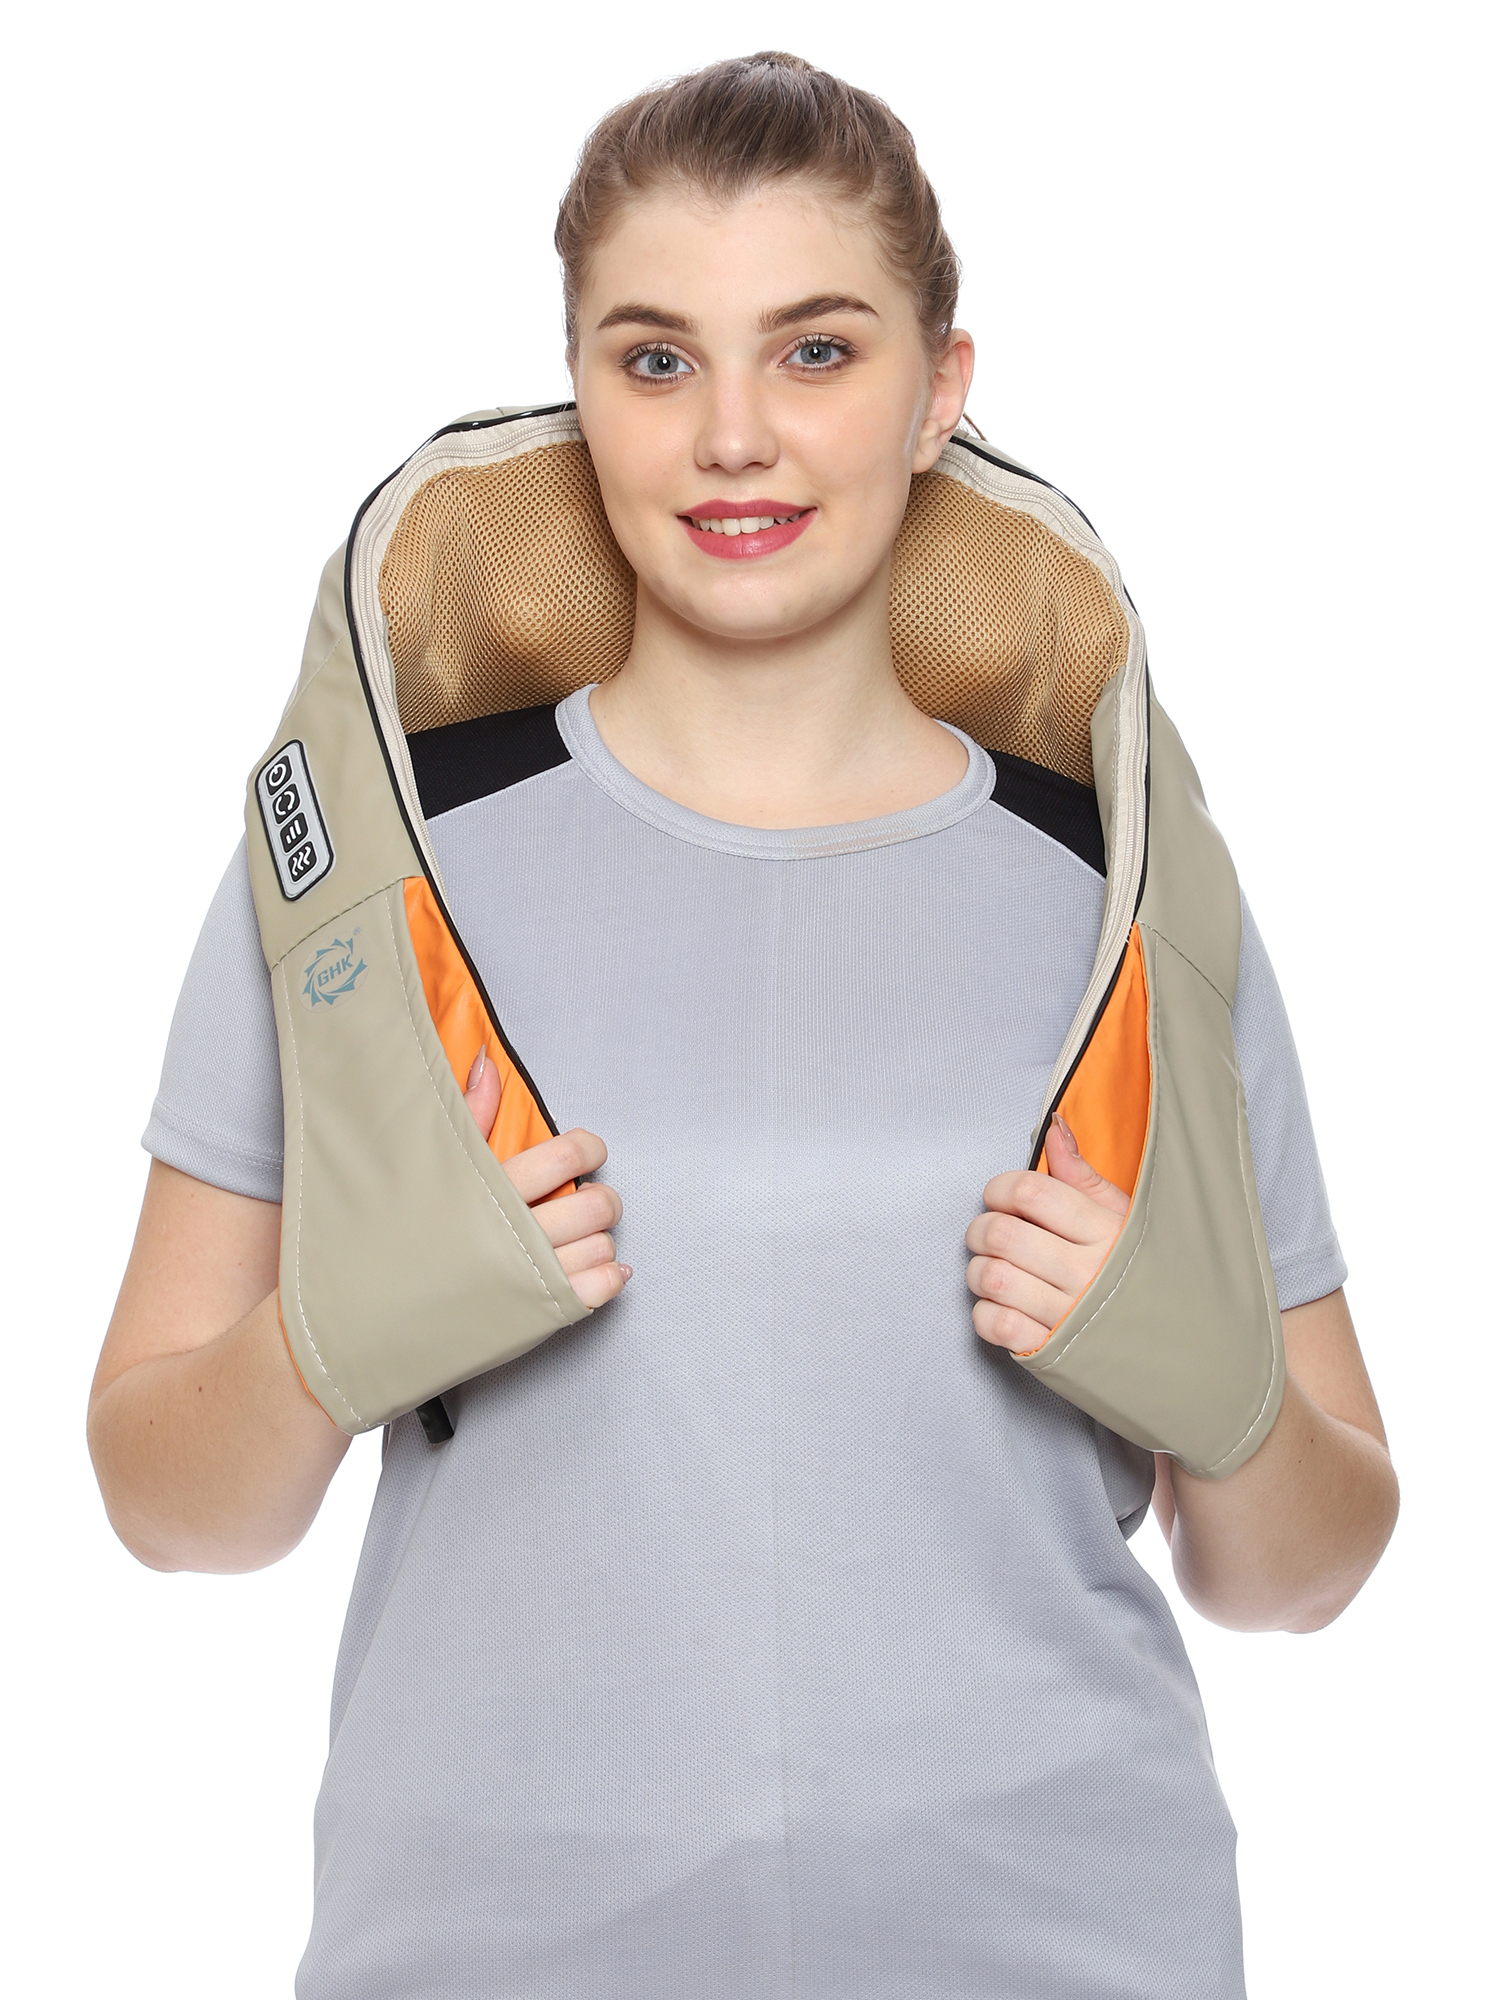 GHK H59 Electric Neck & Shoulder Multi Purpose Usage Kneading Massager for Complete Body Pain Relief